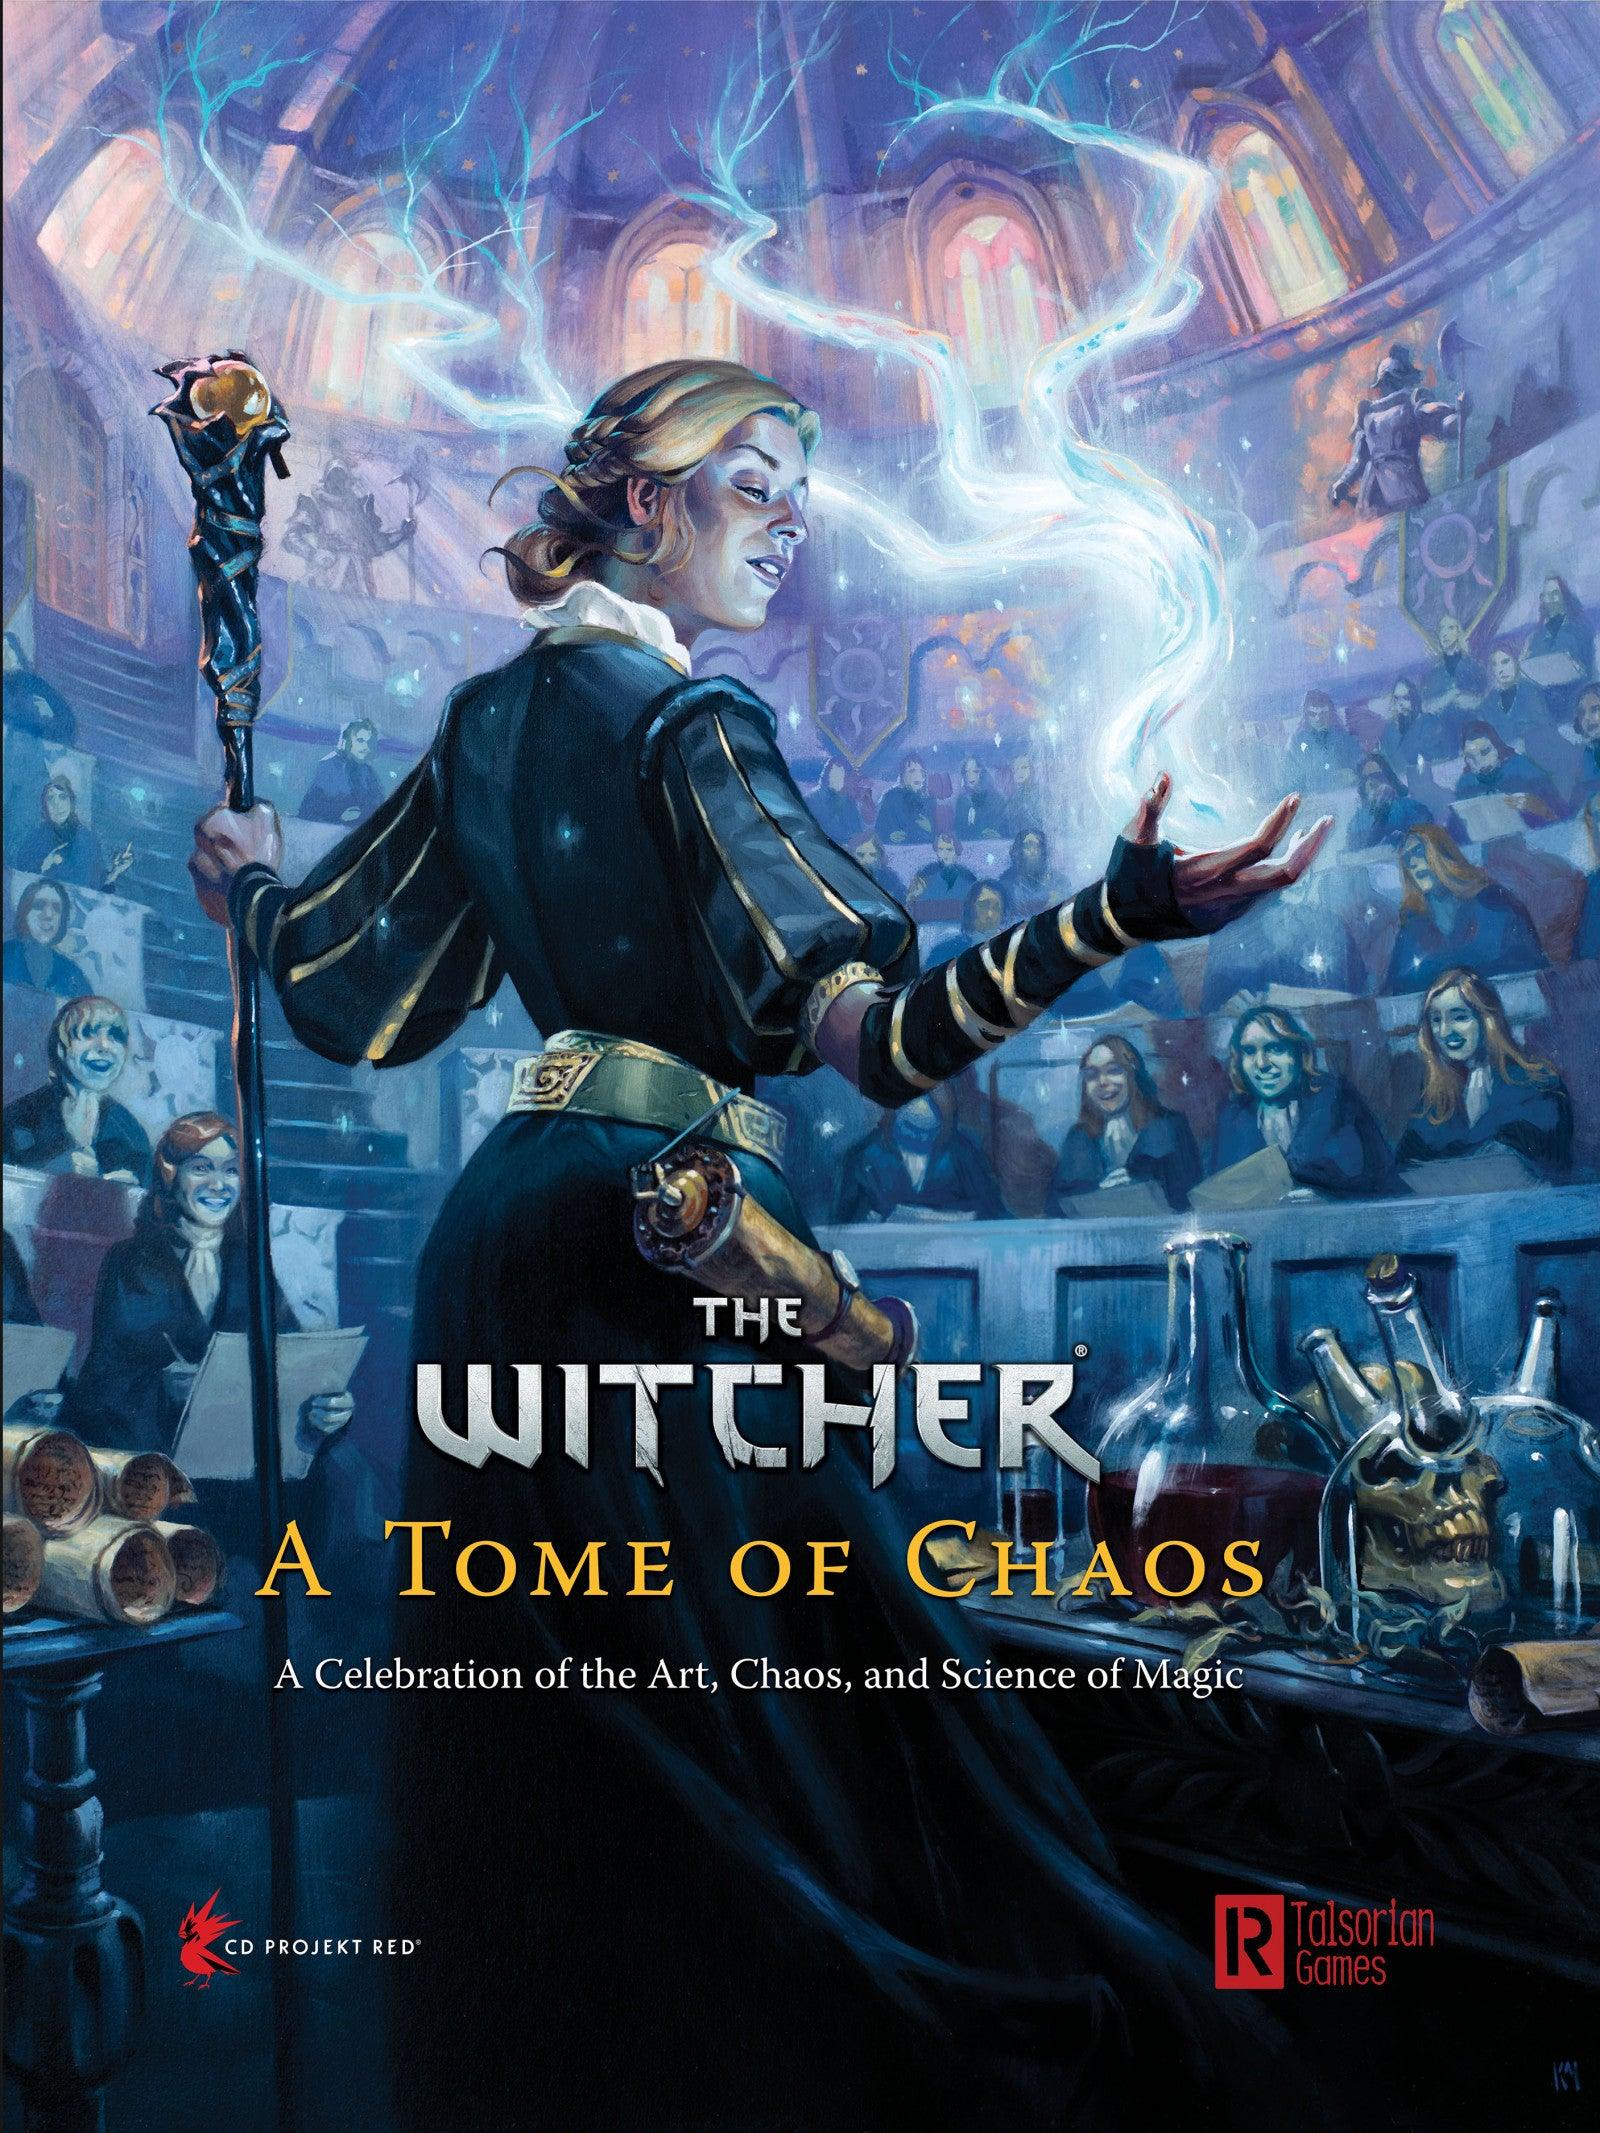 VR-98117 The Witcher RPG A Tome of Chaos - Ross Talsorian Games - Titan Pop Culture